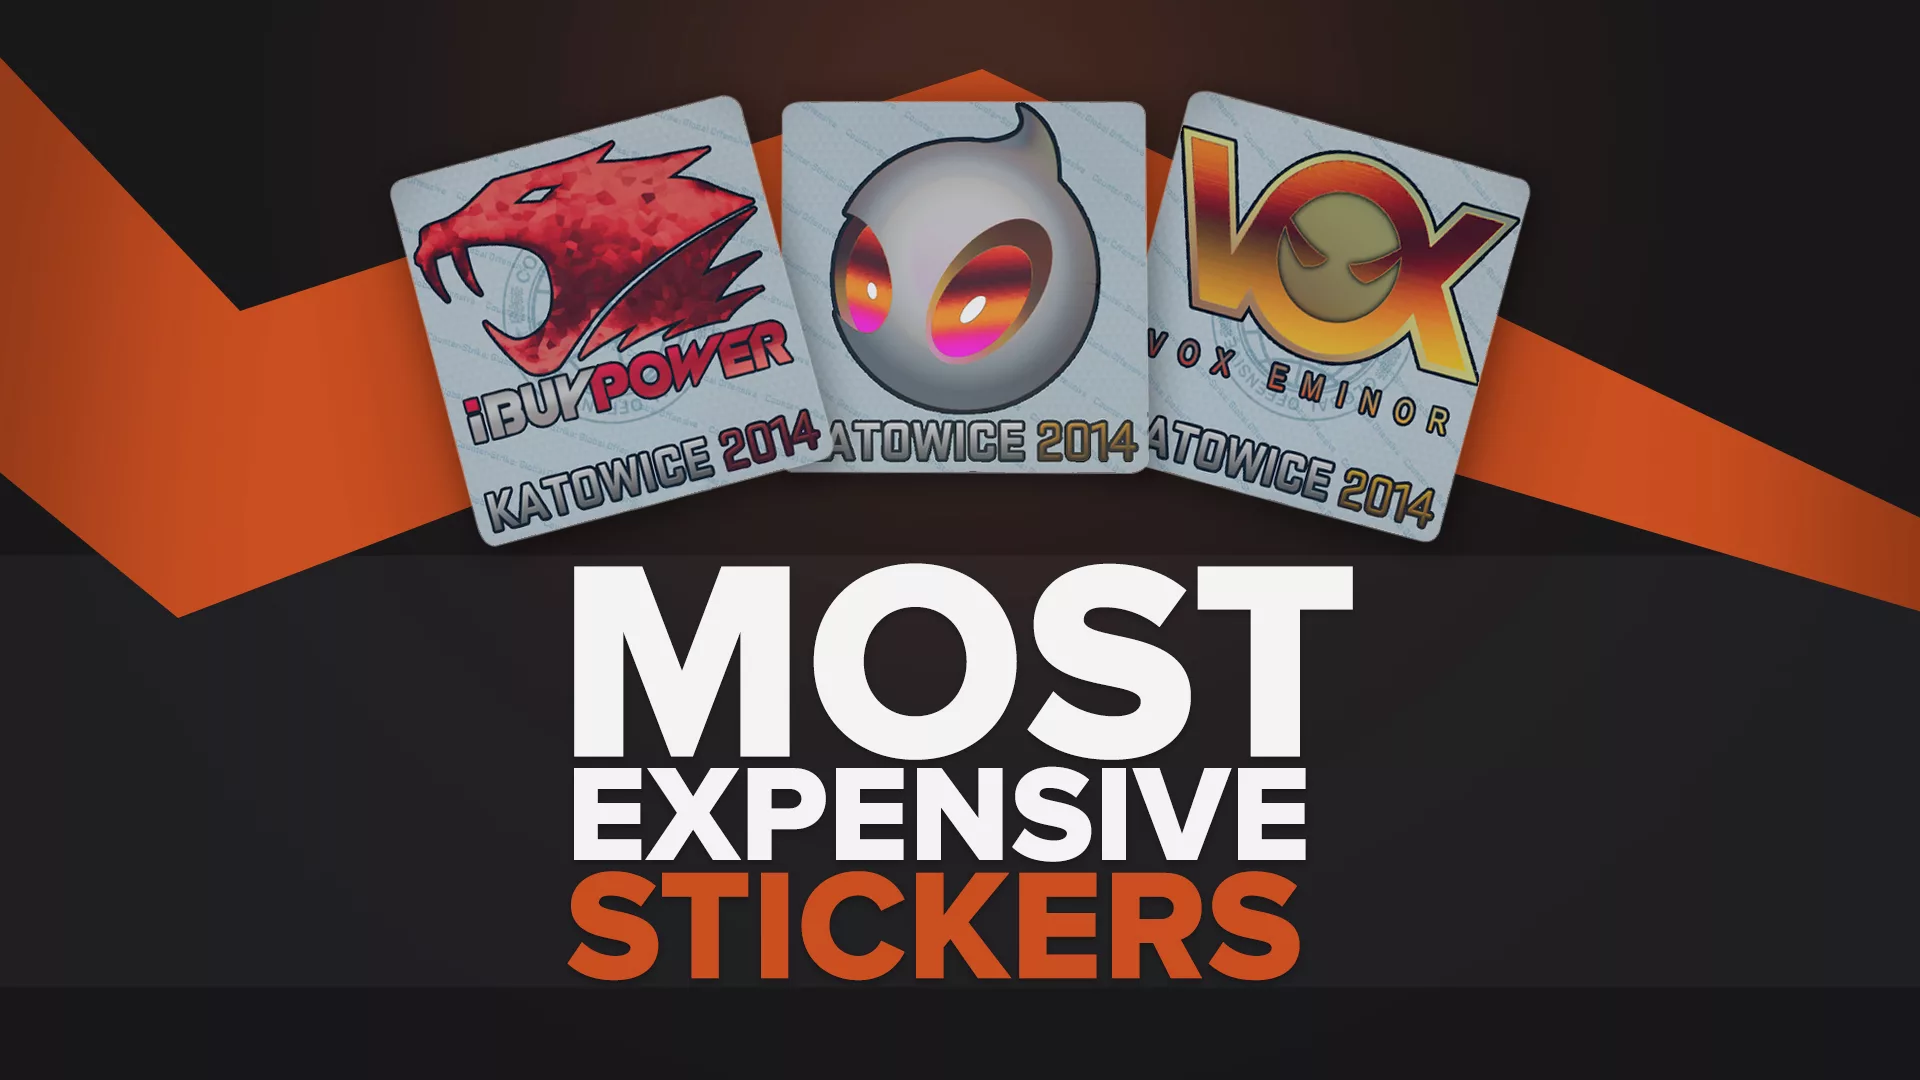 Most Expensive Stickers in CSGO